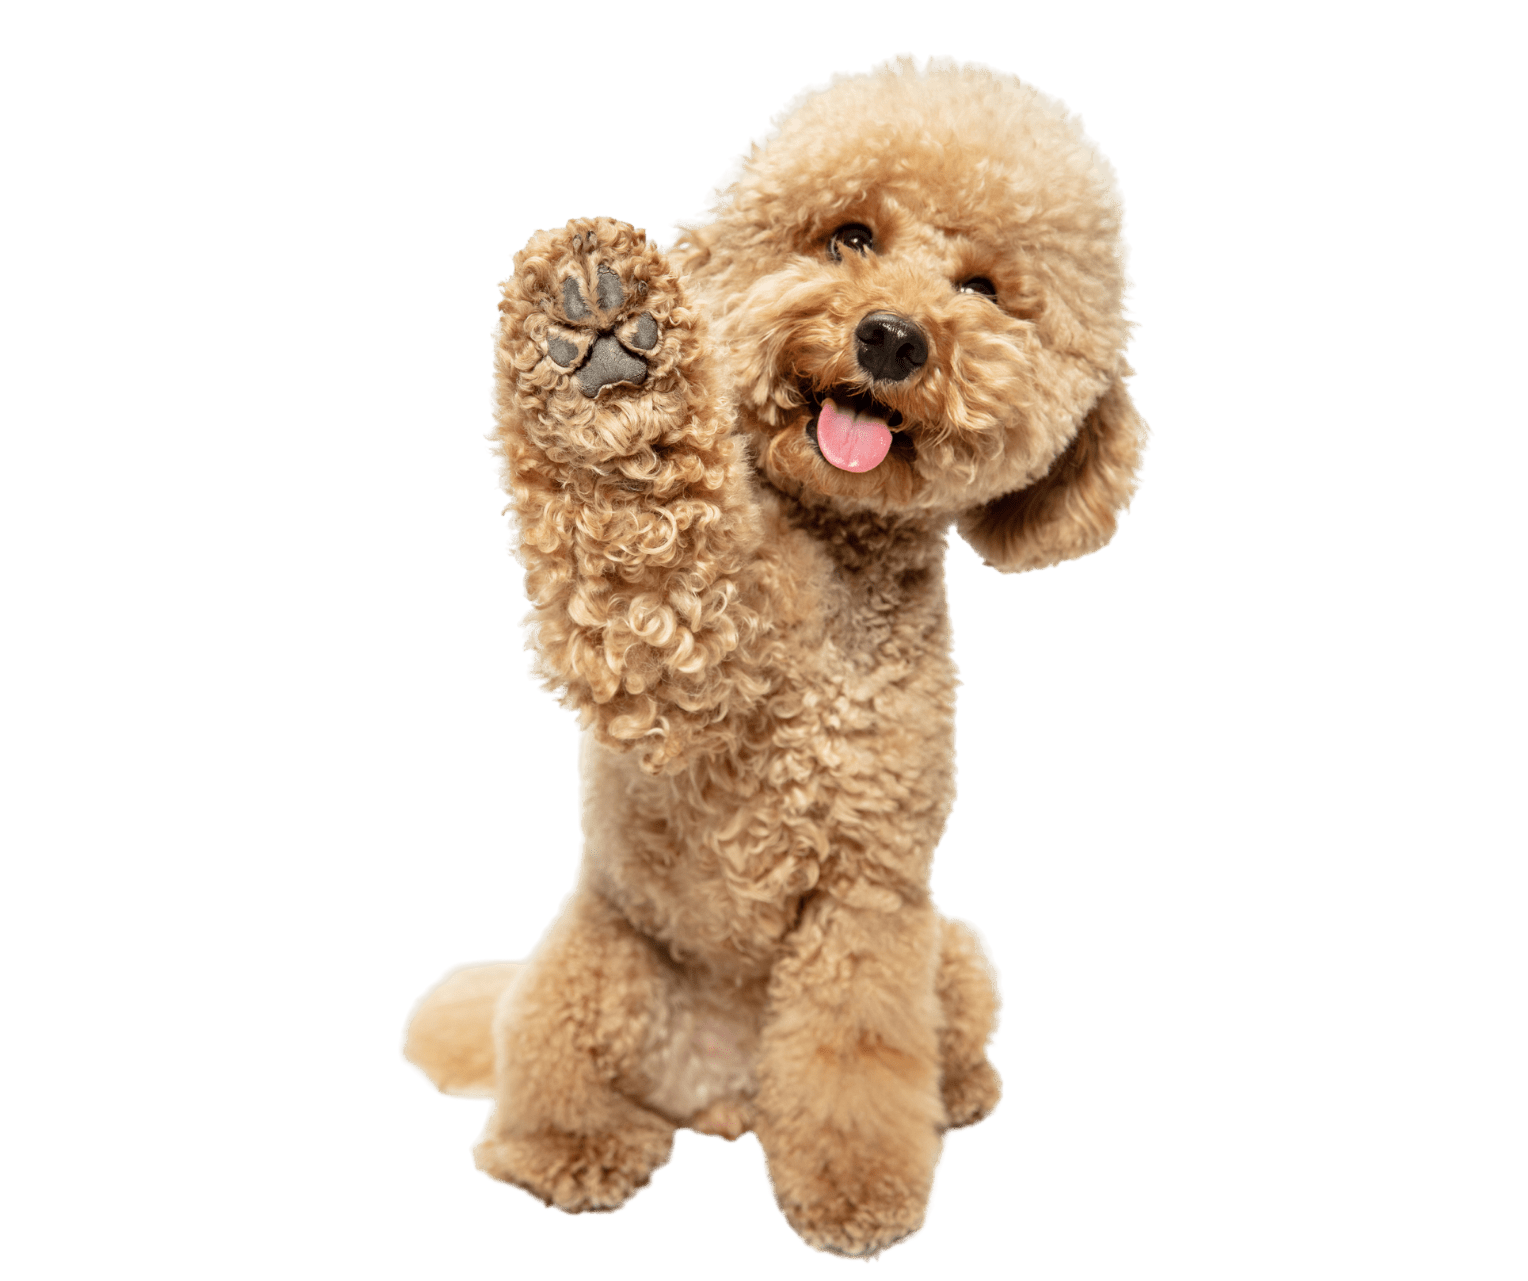 Fluffy dog with one paw up